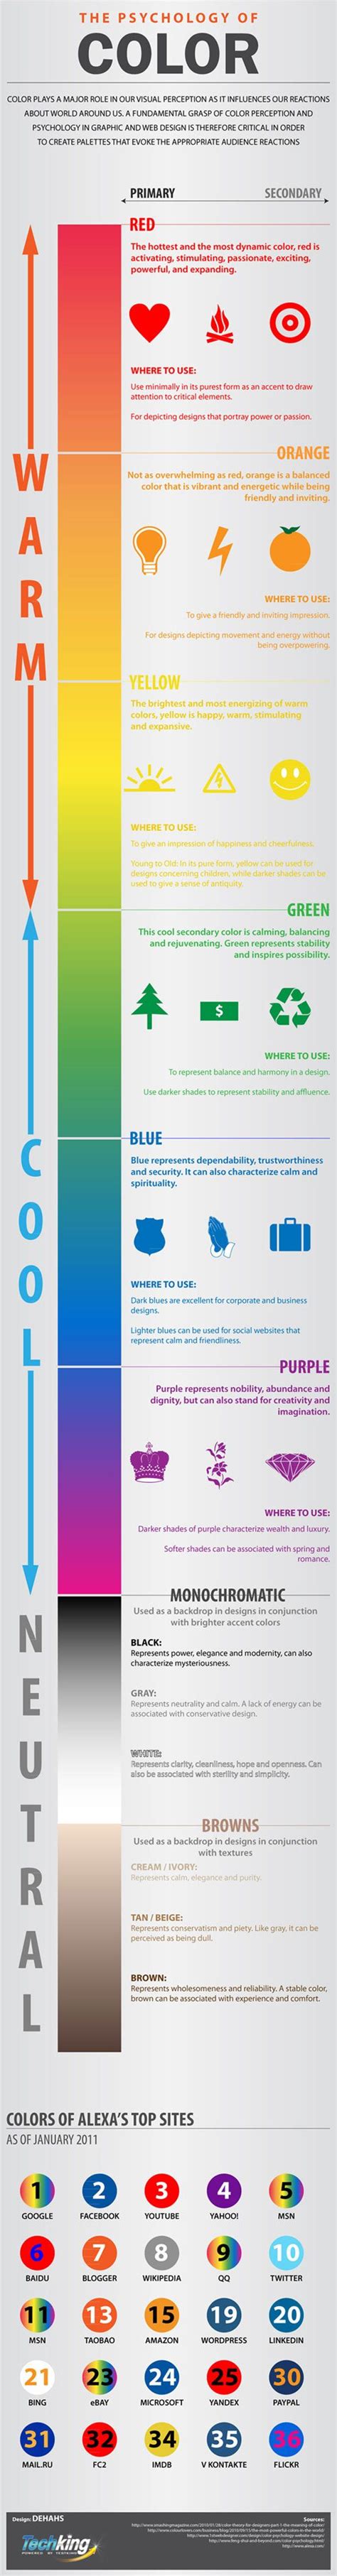 Infographic The Psychology Of Color For Web Design Print Media Centr